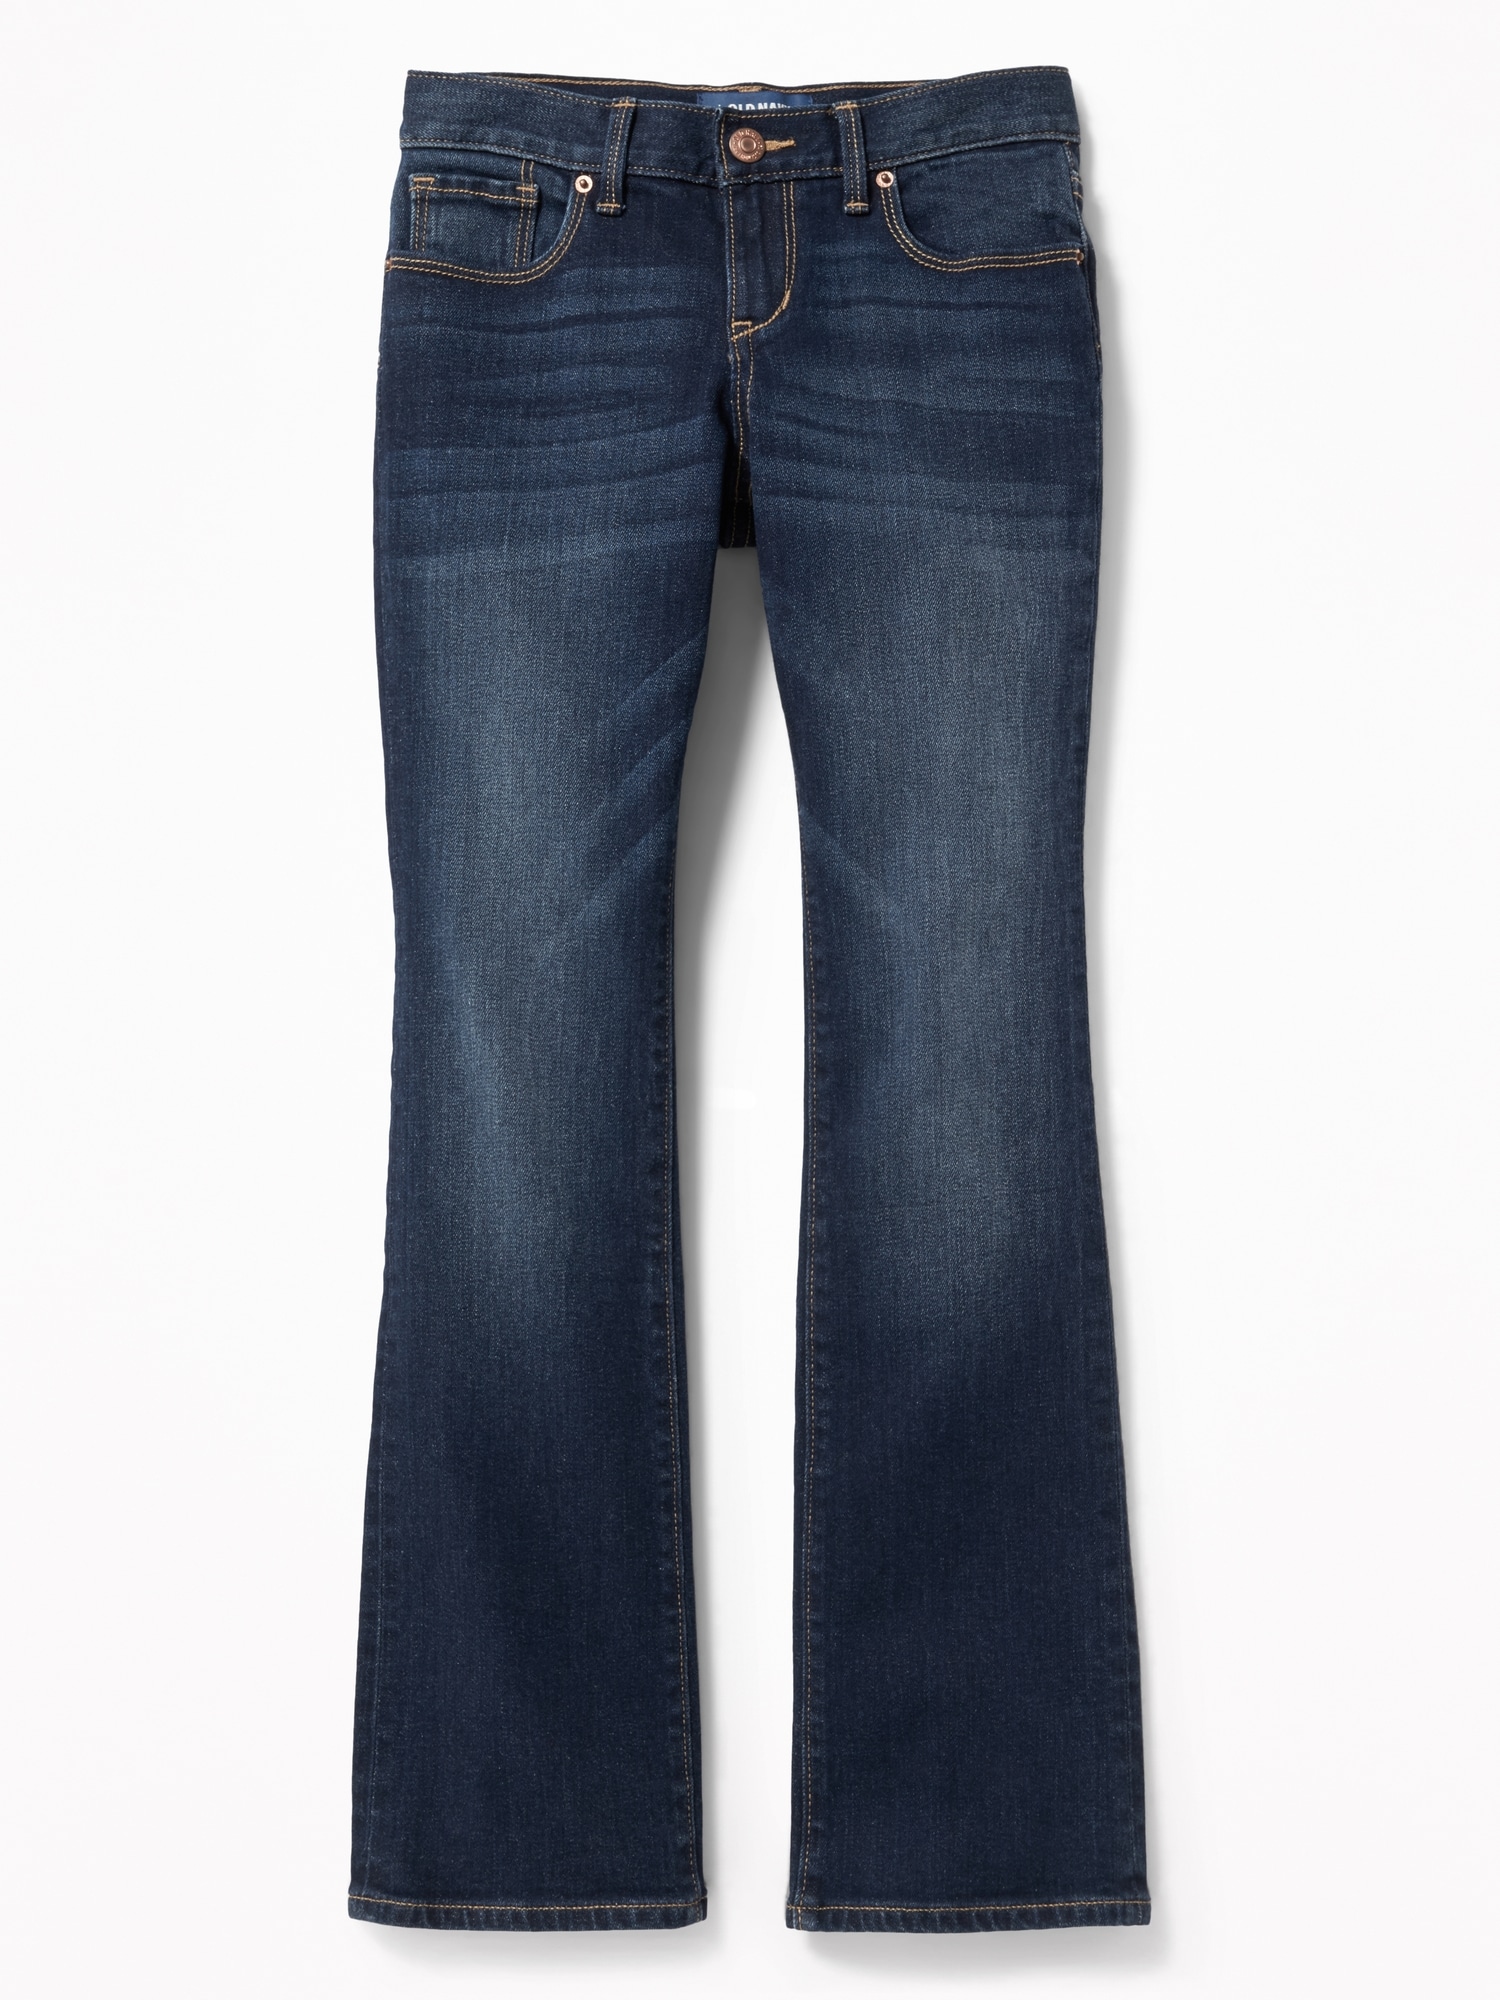 boot cut jeans old navy